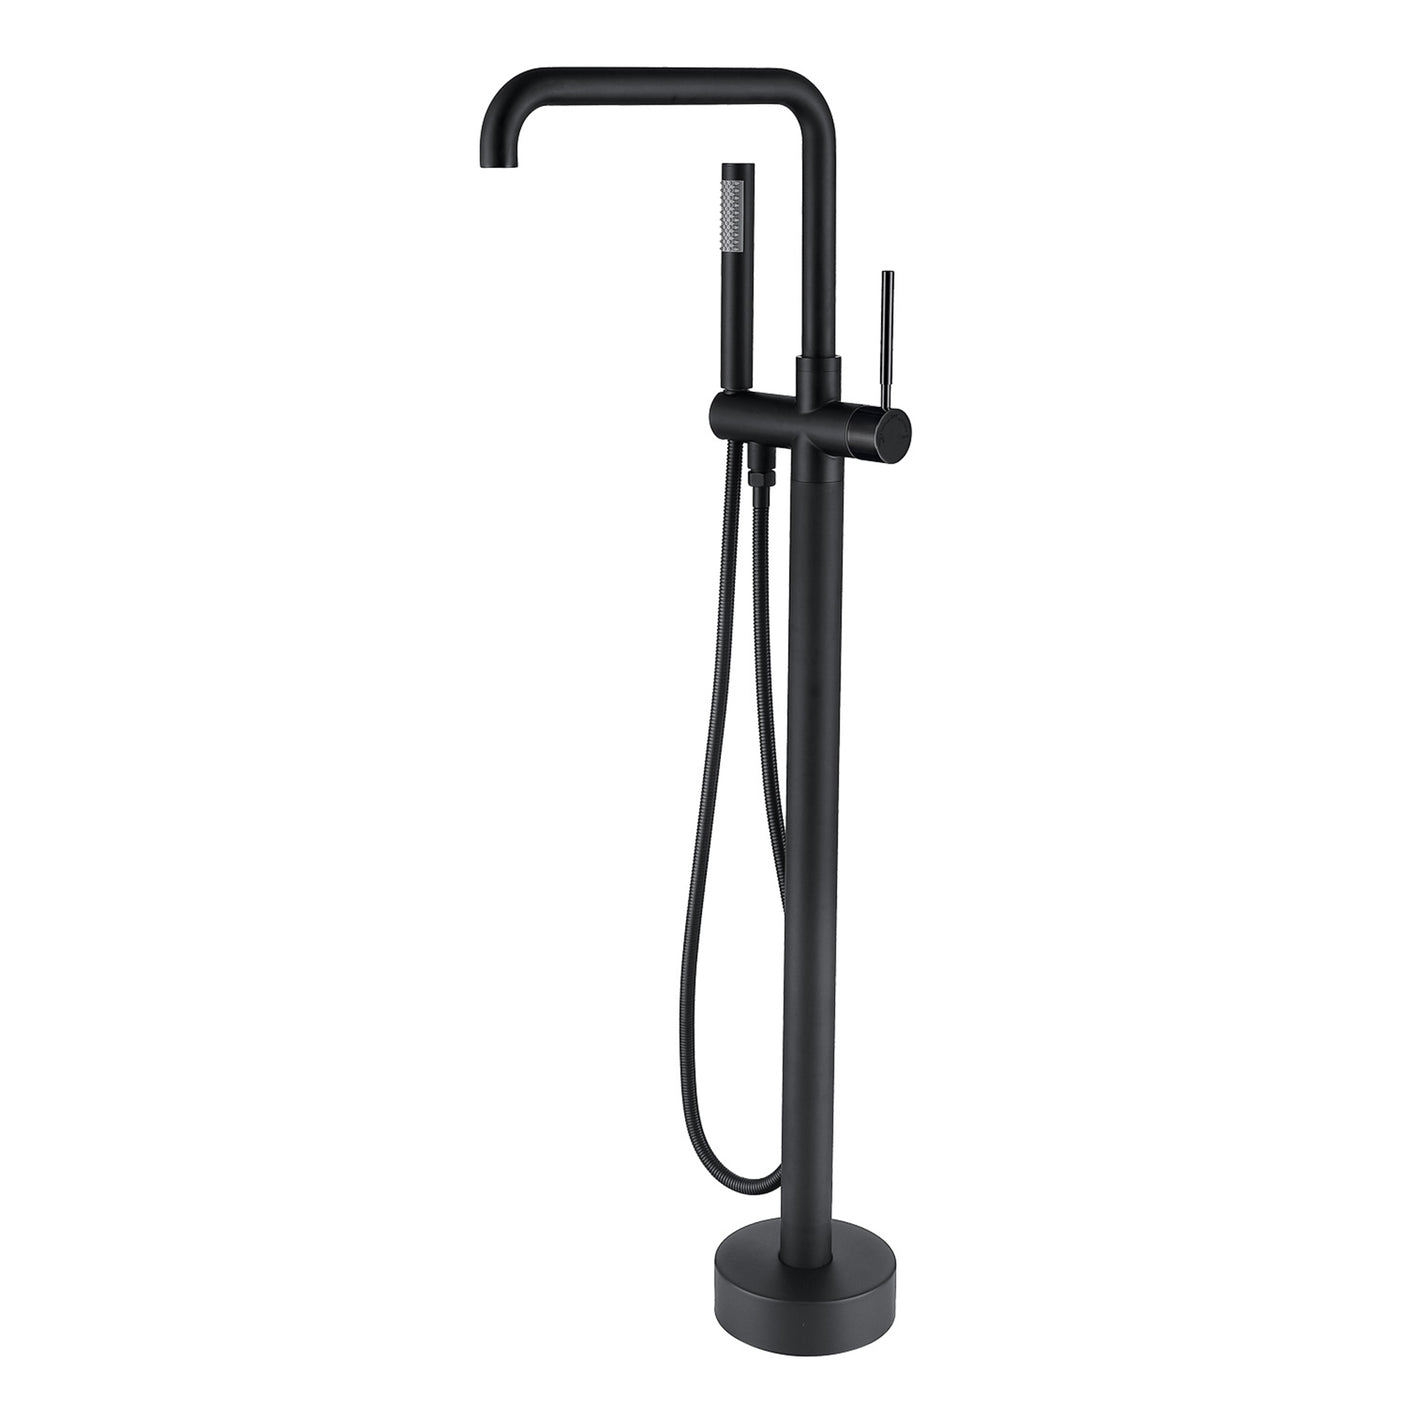 Freestanding Bathtub Faucet with Hand Shower